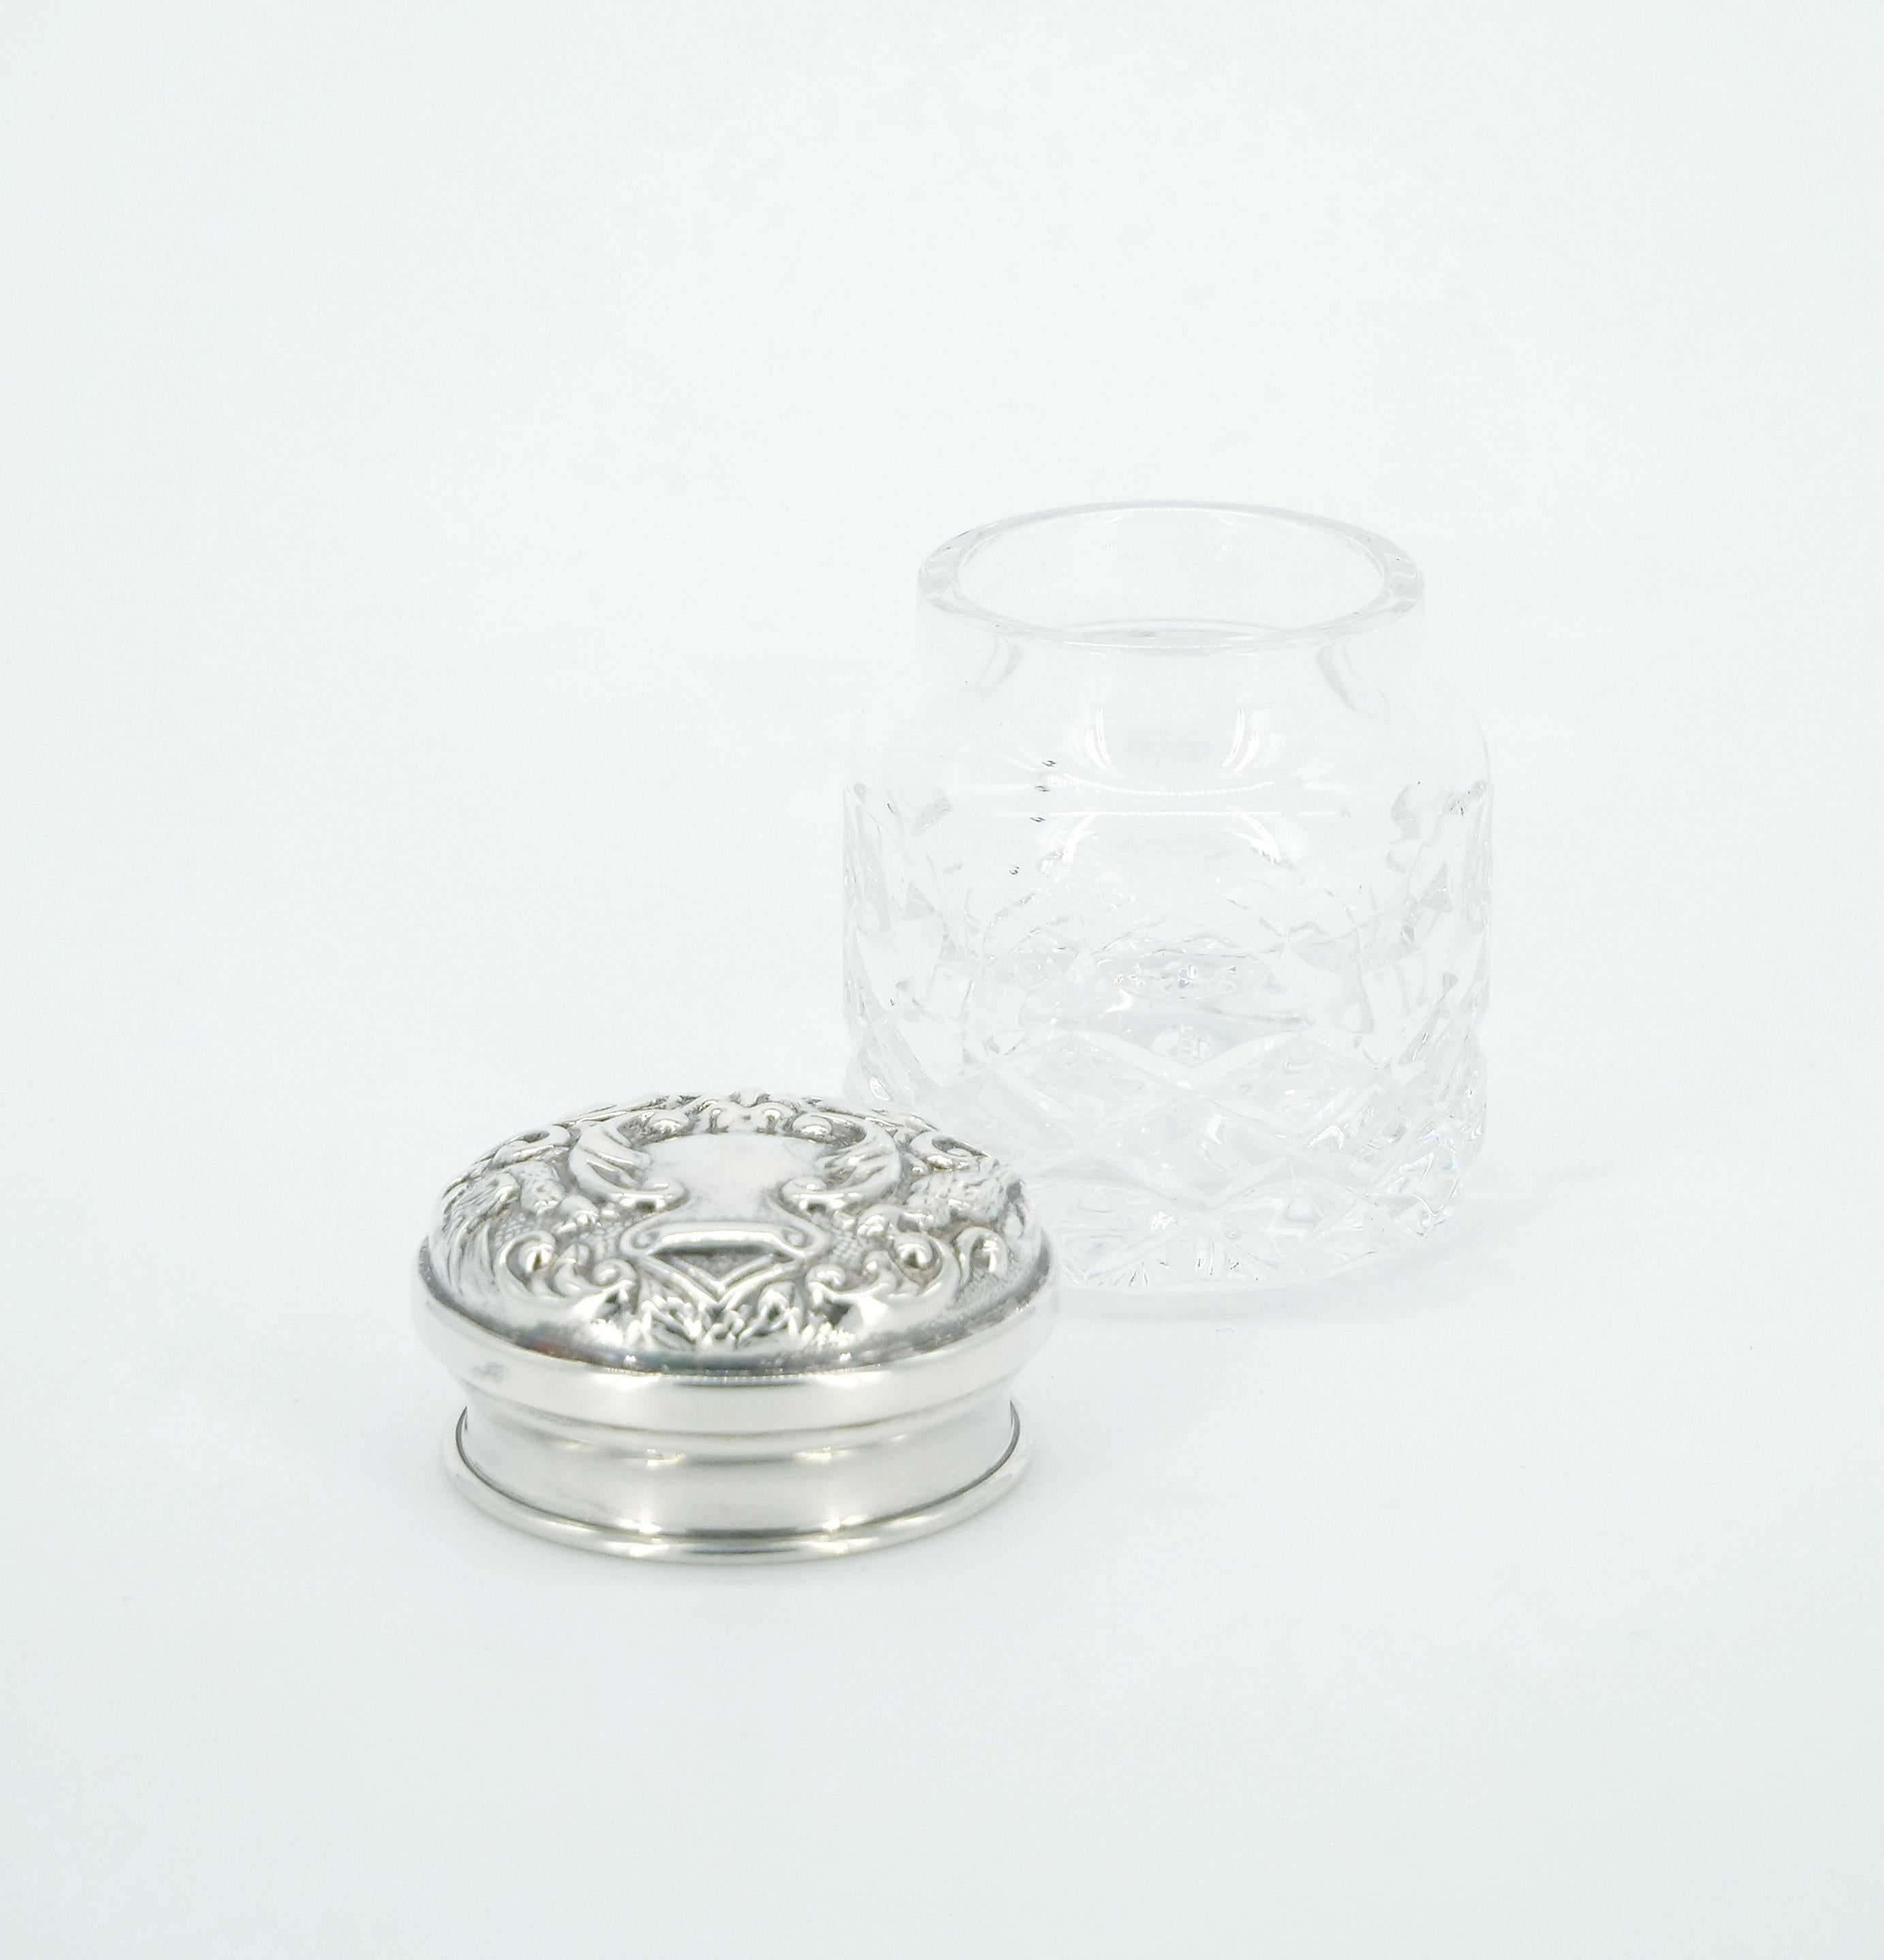 Immerse your space in the charm of the 19th Century with this exquisite English Sterling Silver Lidded Top and Cut Glass Covered Piece. This covered jar is a testament to the artistry of its time, boasting a sterling silver covered top with a